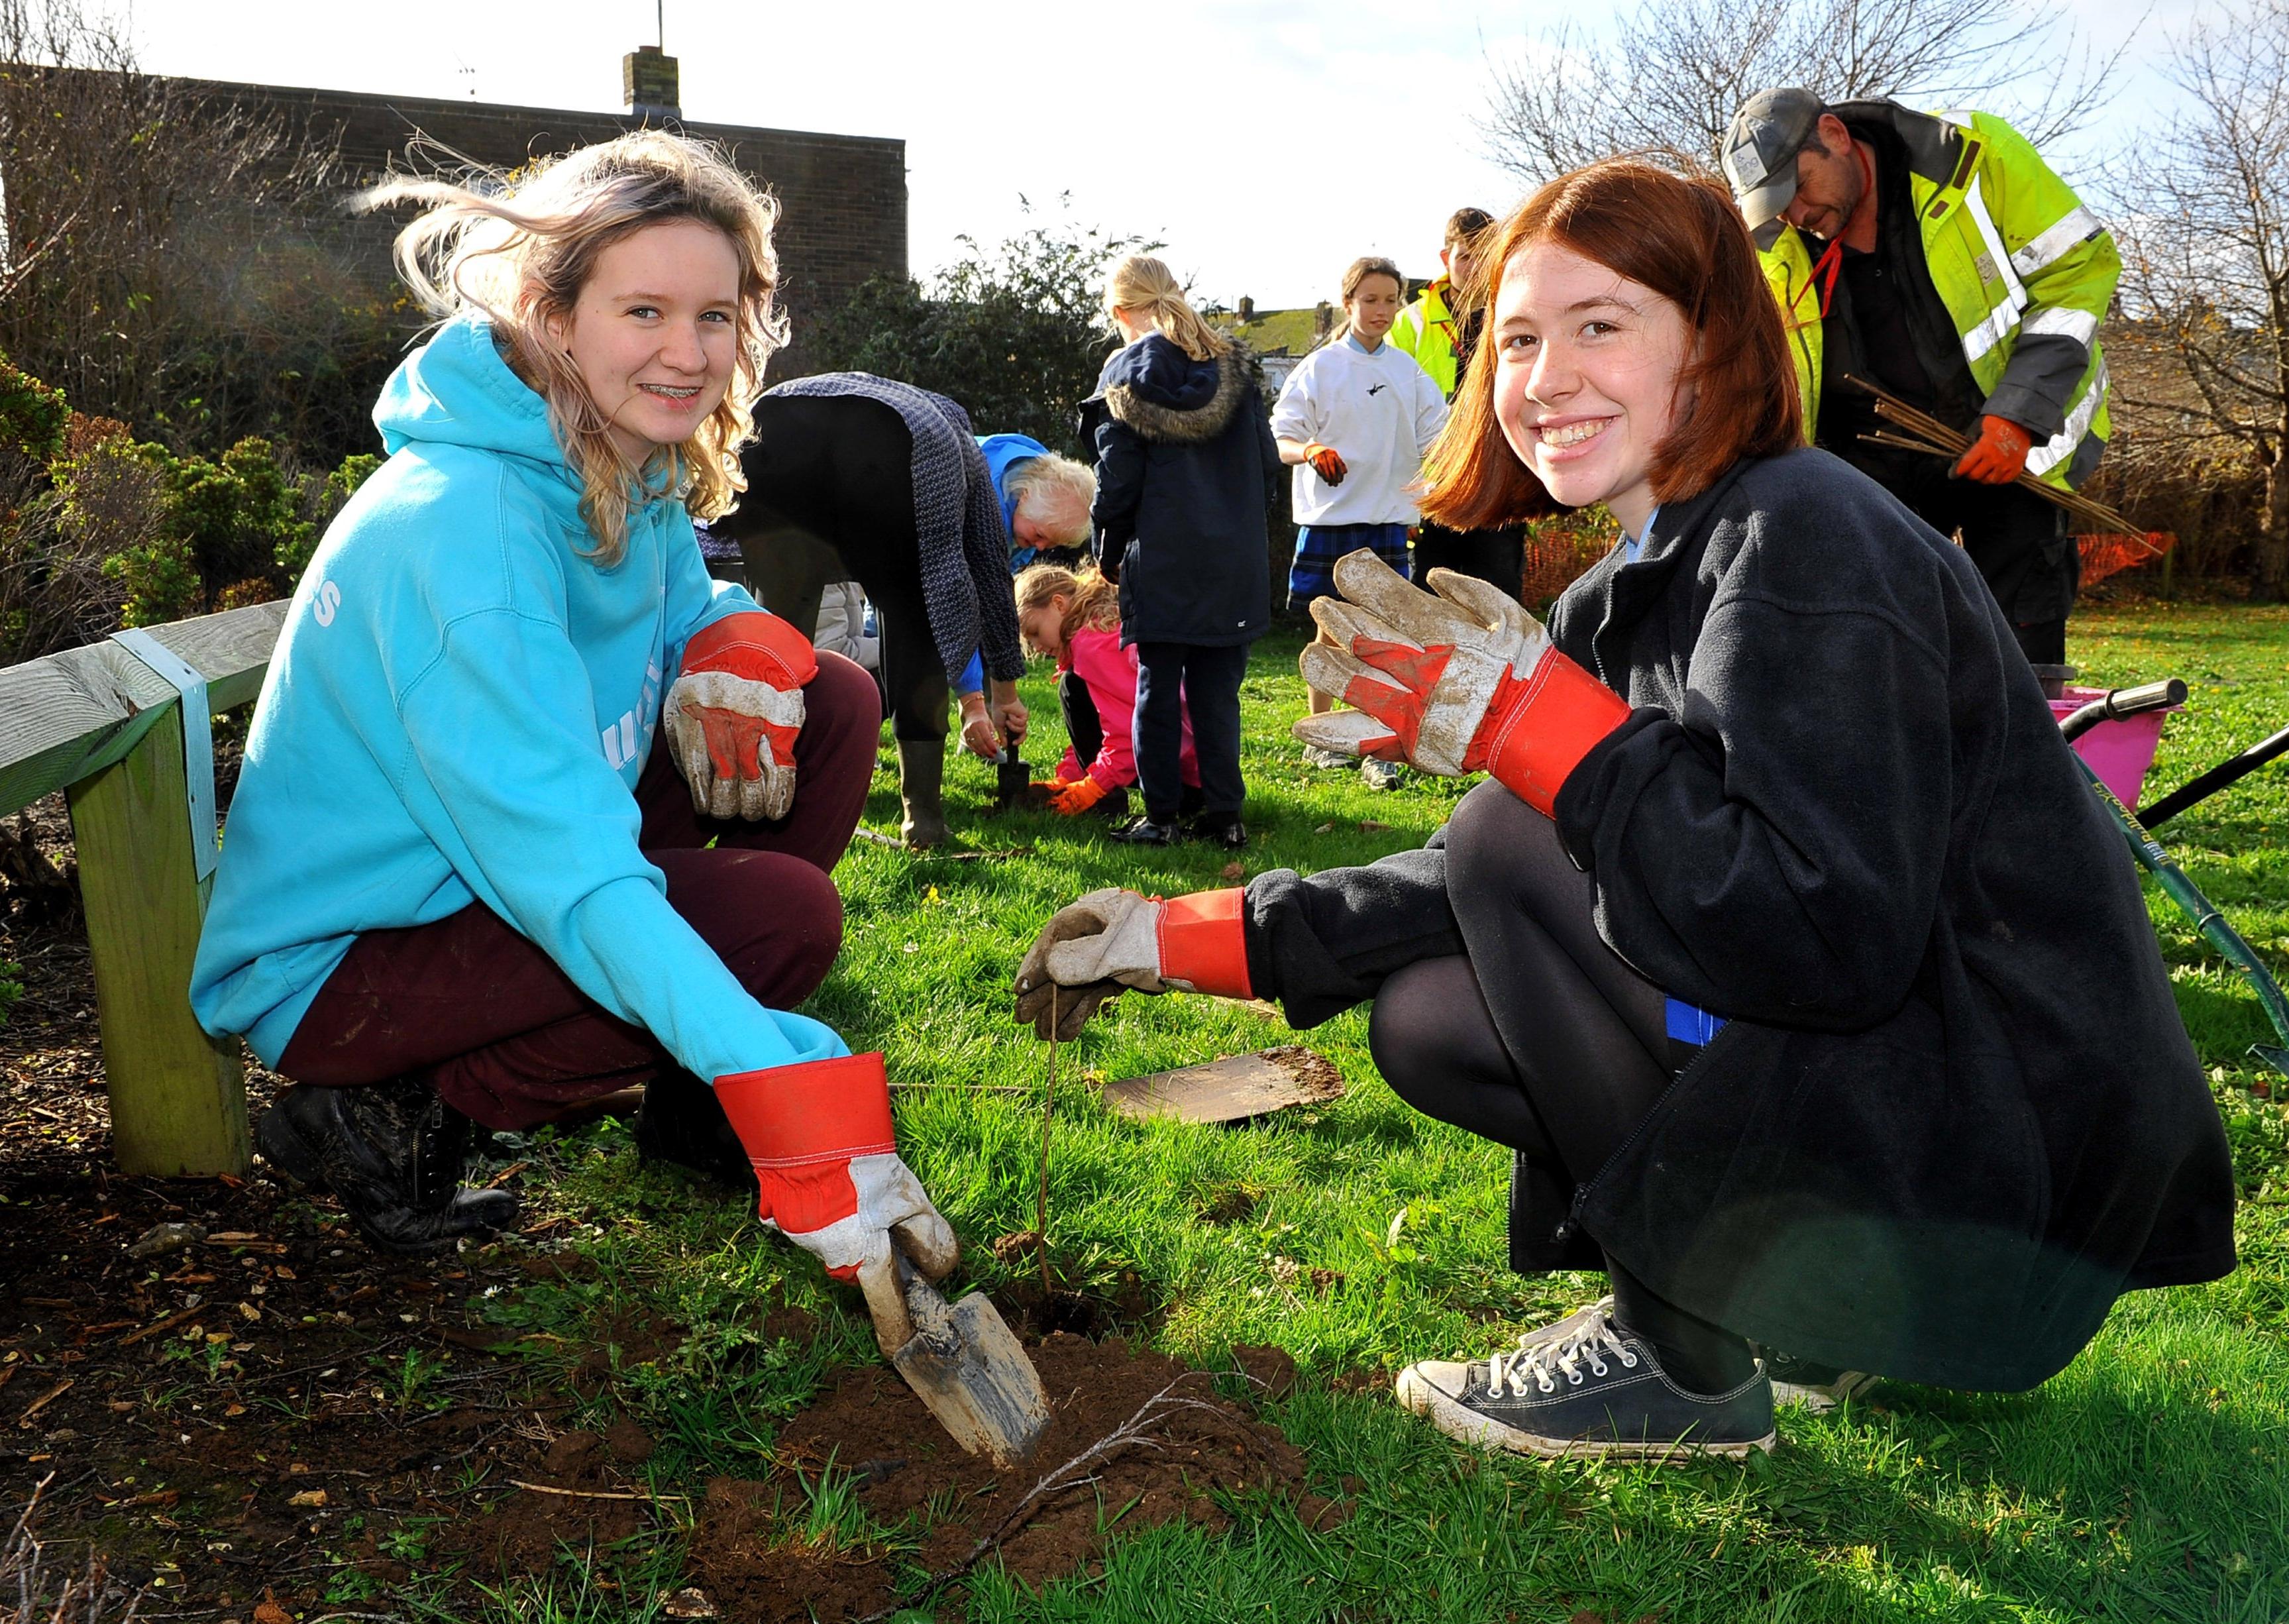 Shoreham Academy students spent the day planting trees